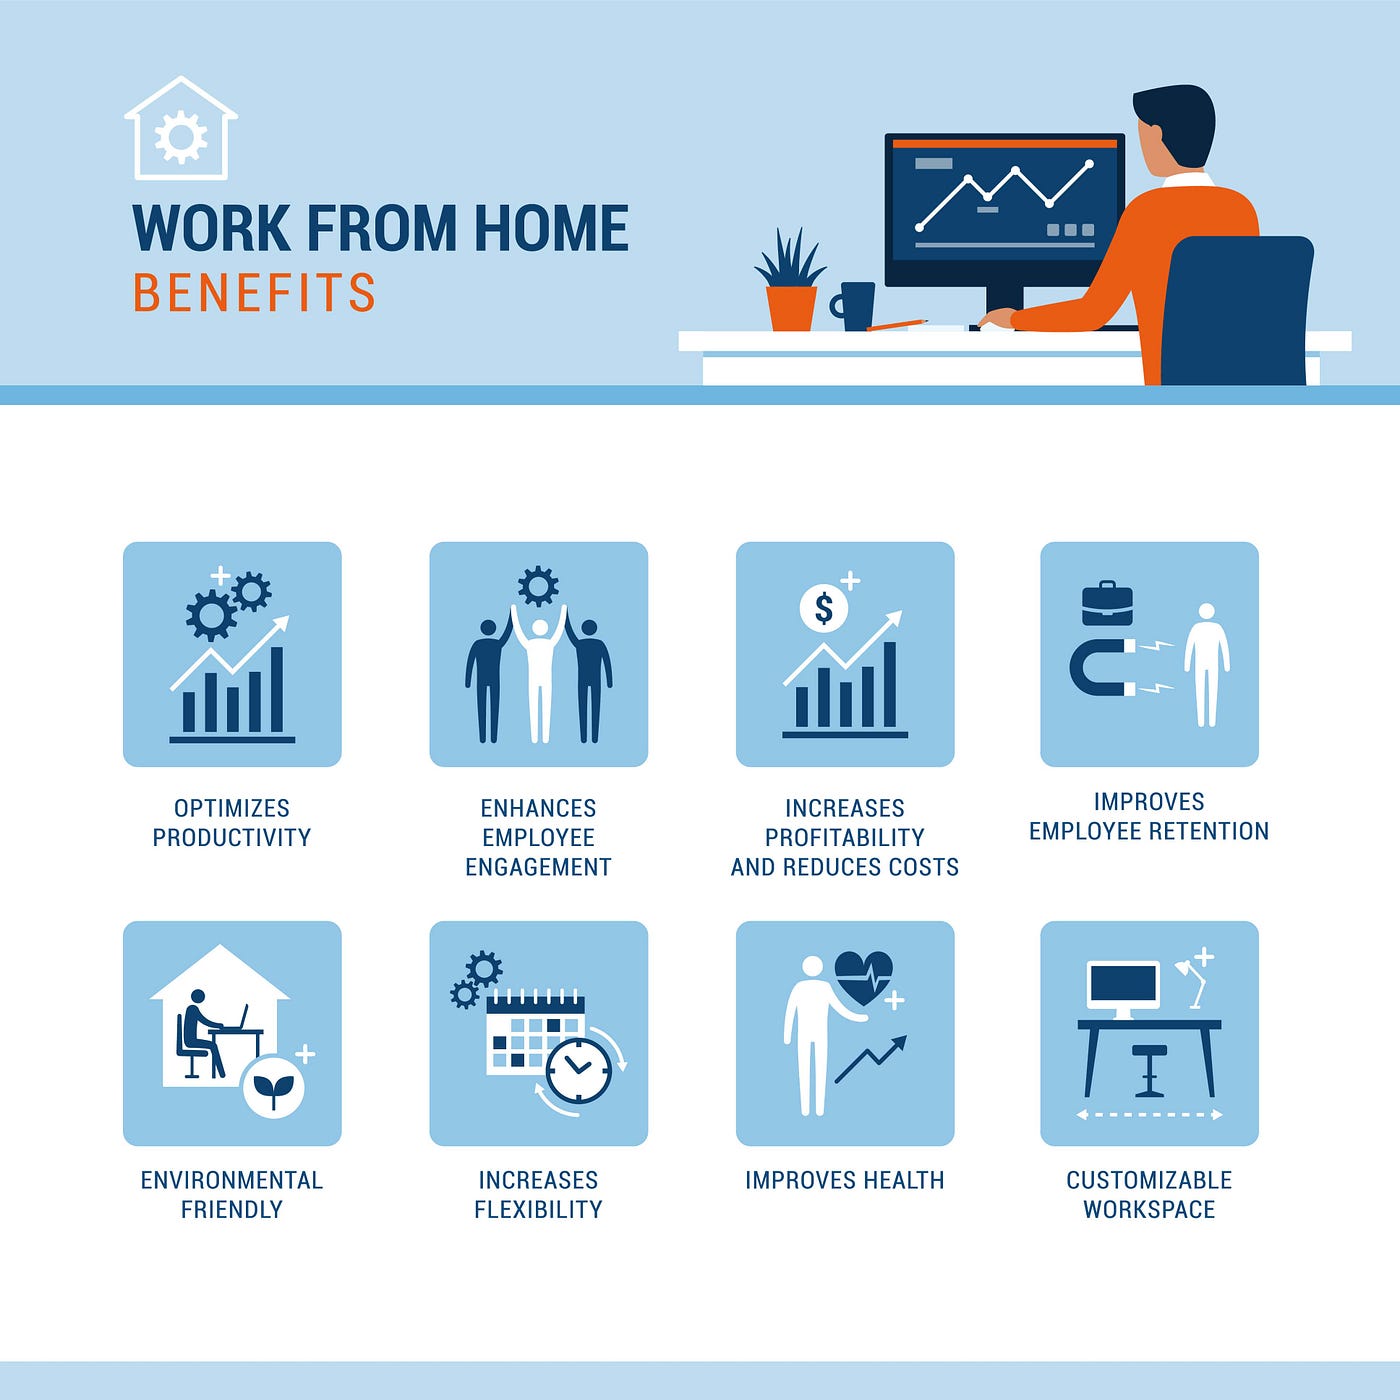 17 Benefits for Employees Working From Home (Plus Tips)